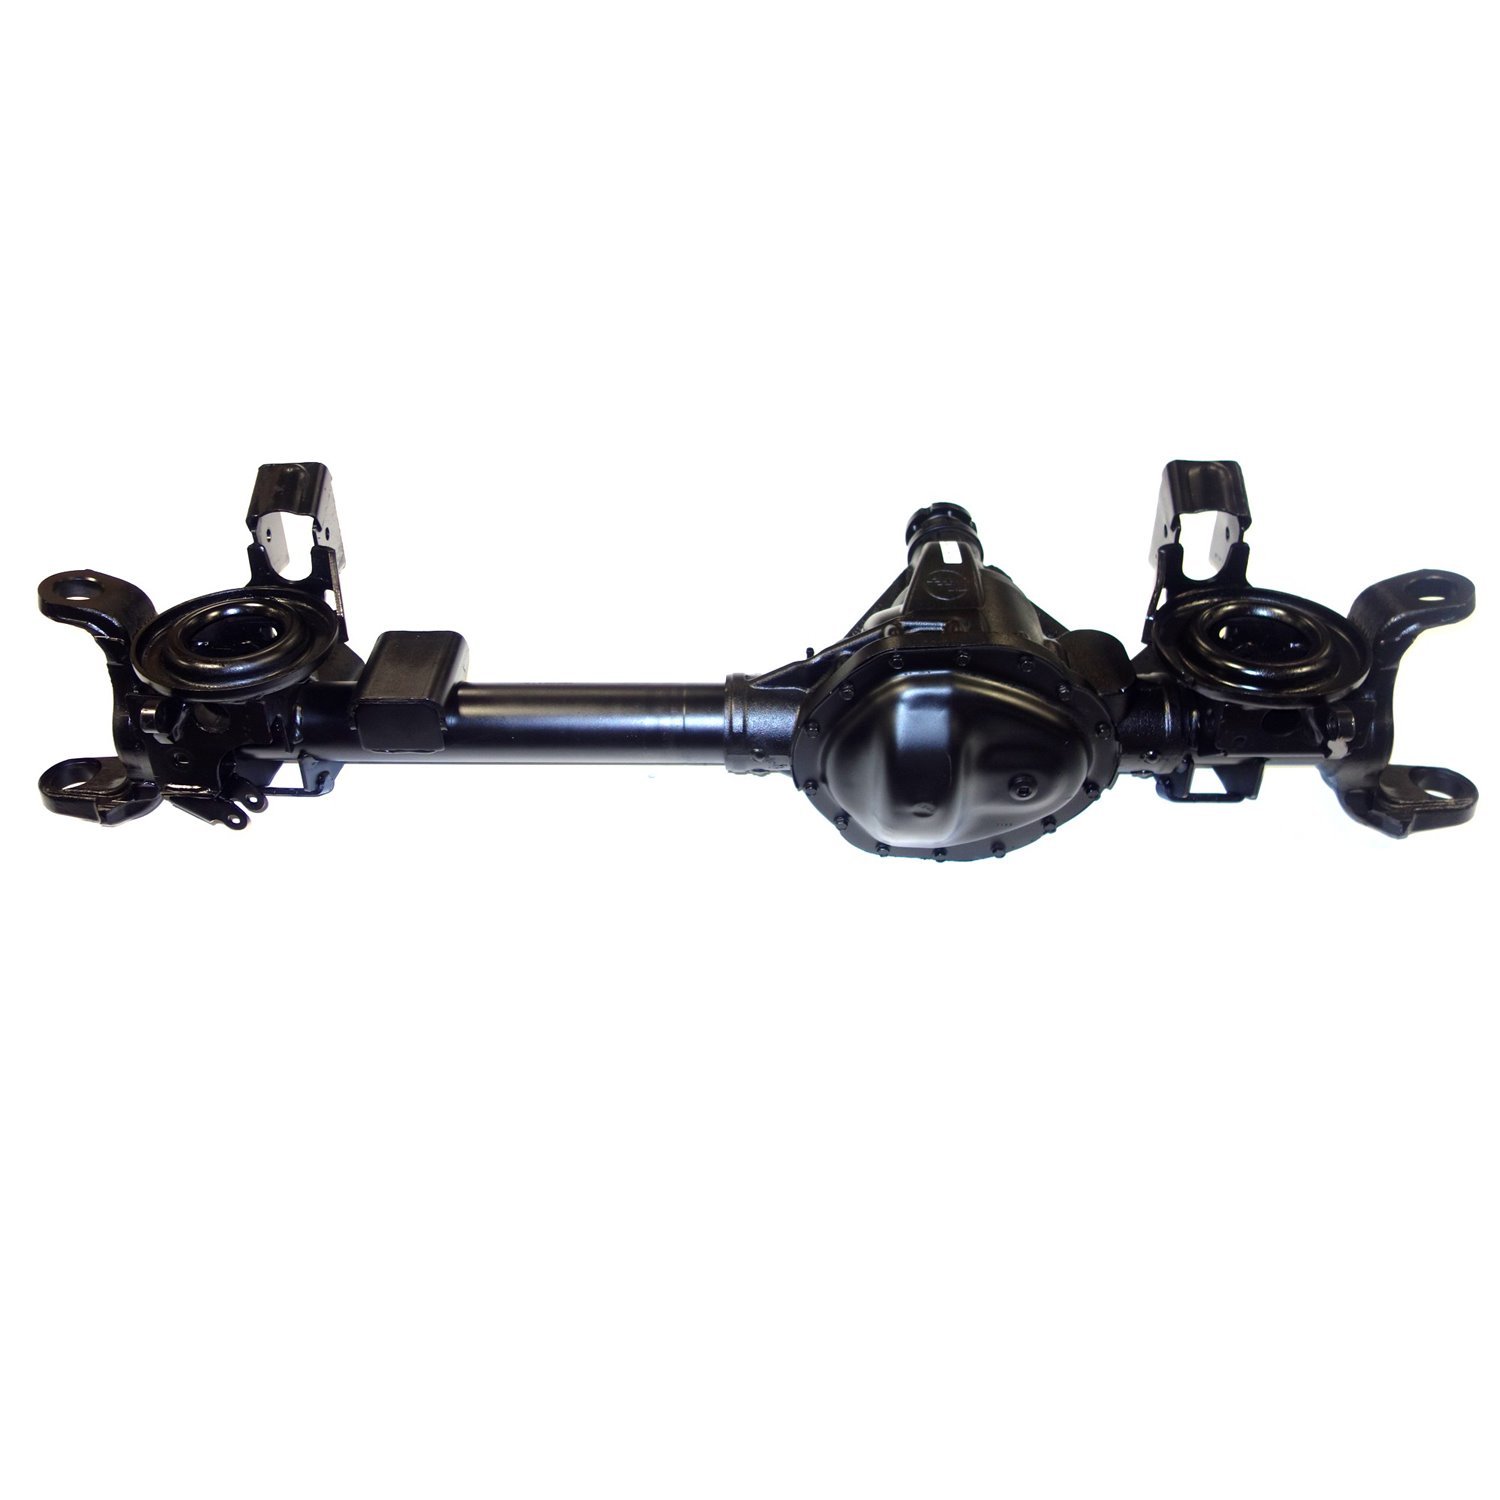 Remanufactured Complete Axle Assembly for Chrysler 9.25" Front 10-11 Dodge Ram 3.42 Ratio